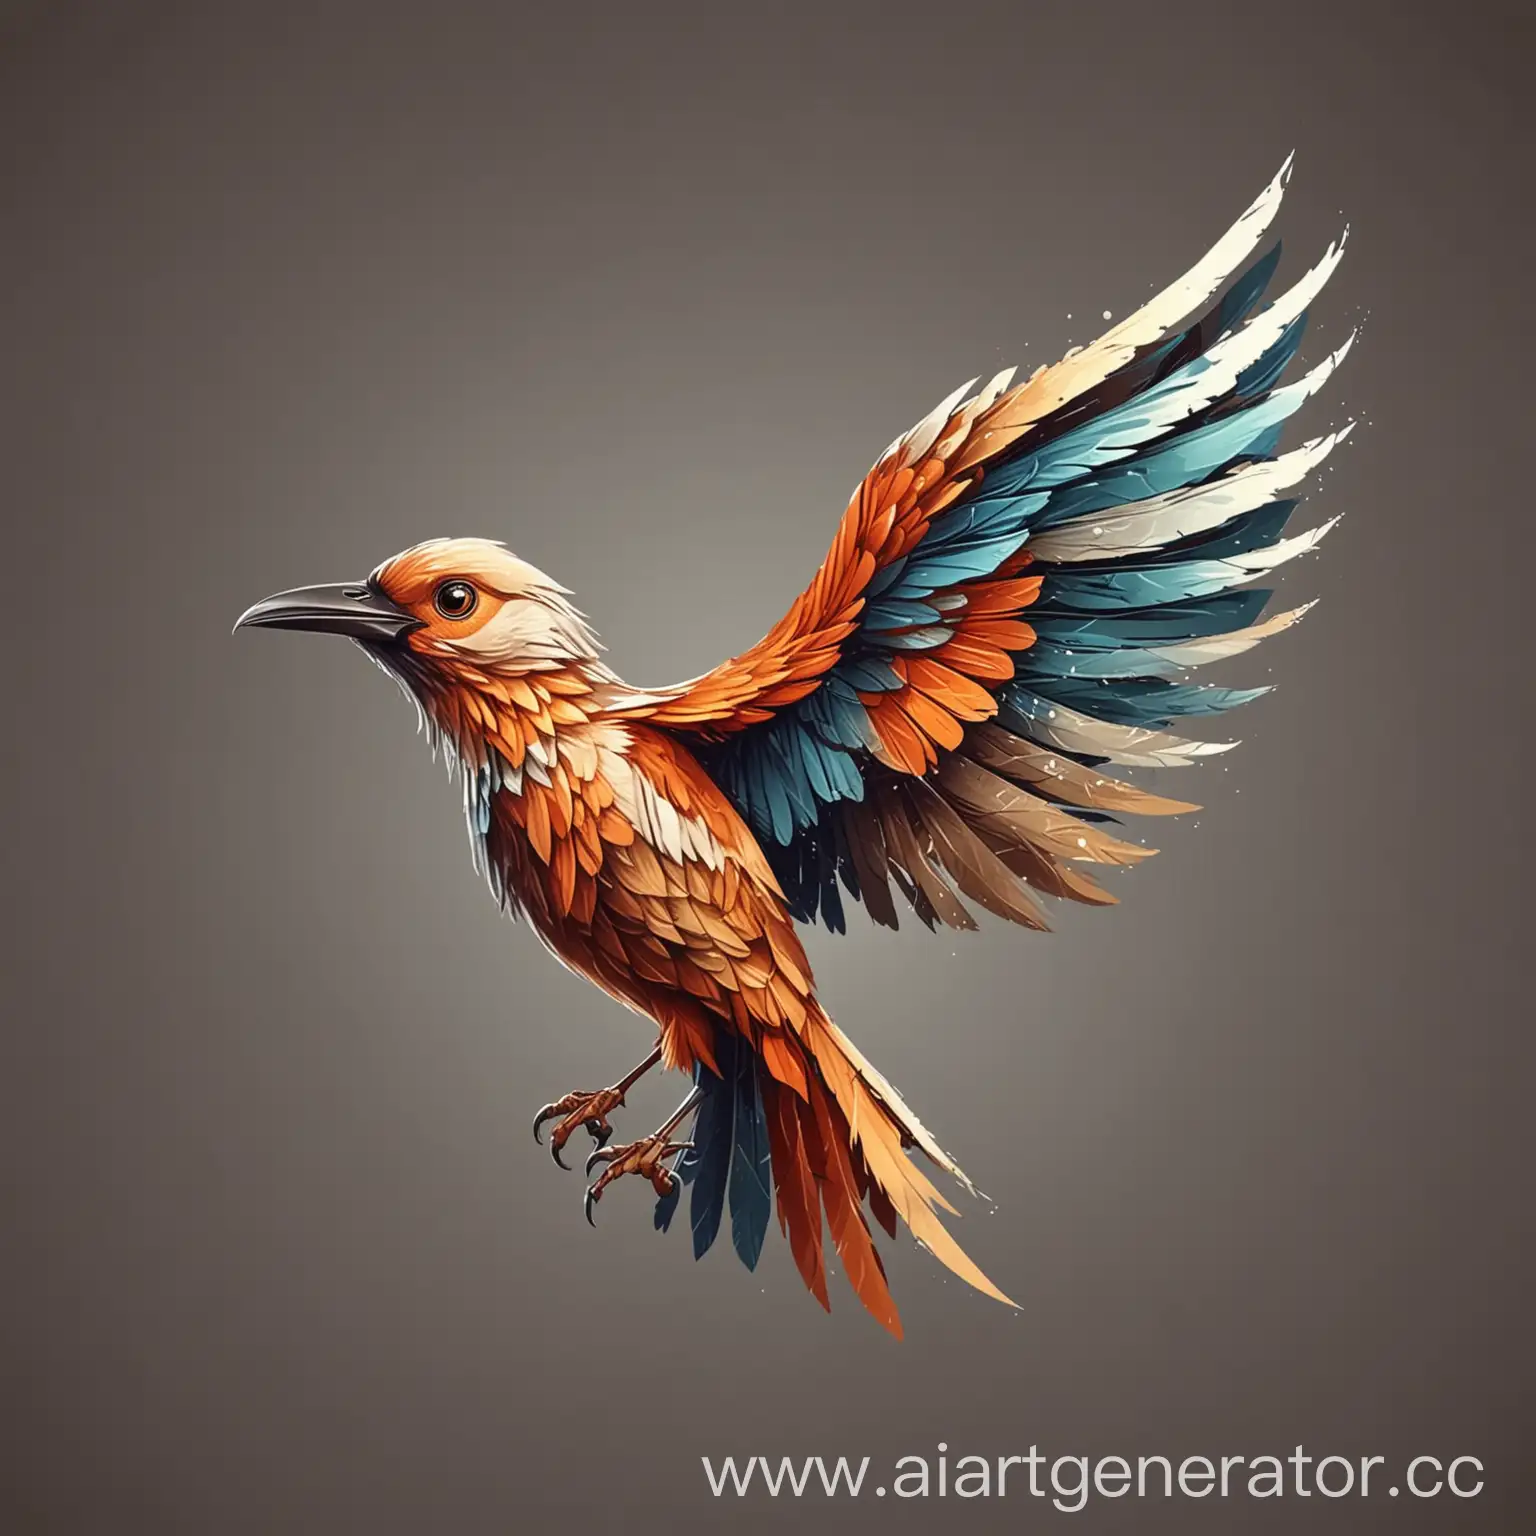 Vibrant-Bird-Logotype-with-Detailed-Wings